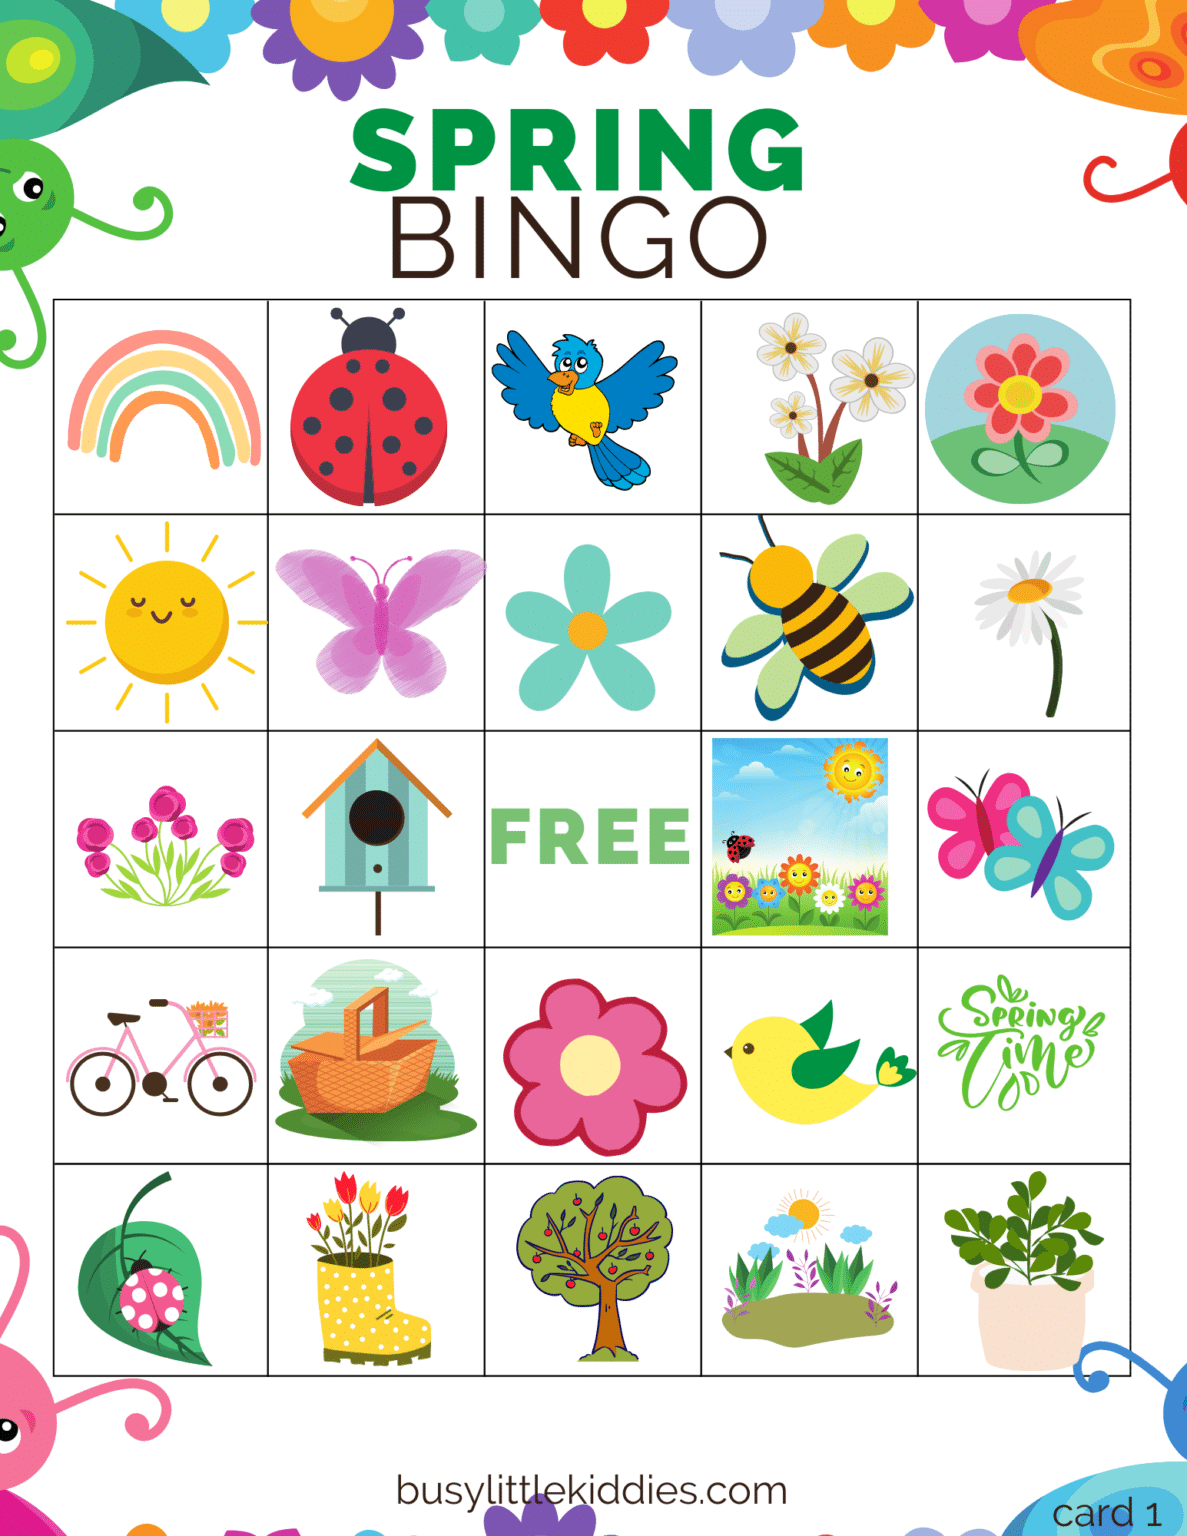 Spring Bingo Free Printable for Kids 4 Players - Busy Little Kiddies (BLK)